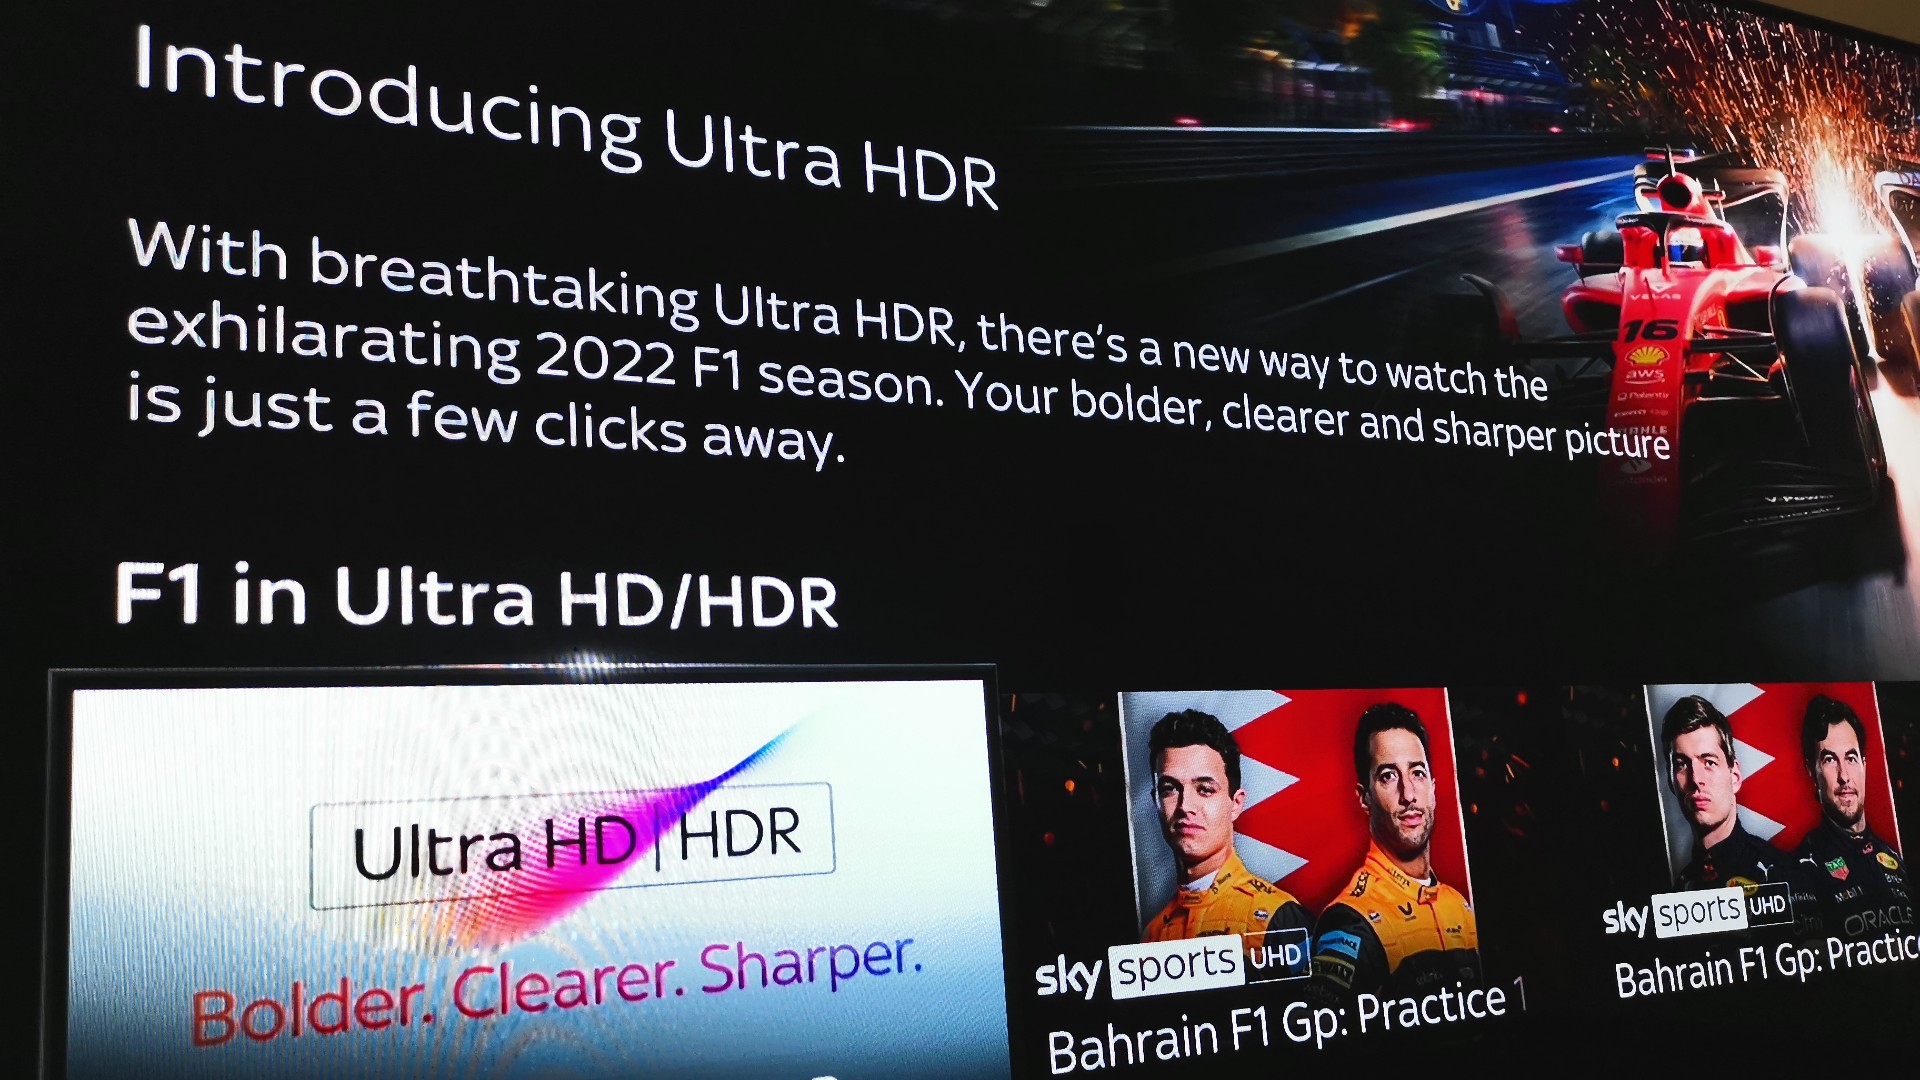 Formula 1 has never looked better as Sky Sports adds HDR to 4k for 2022 season